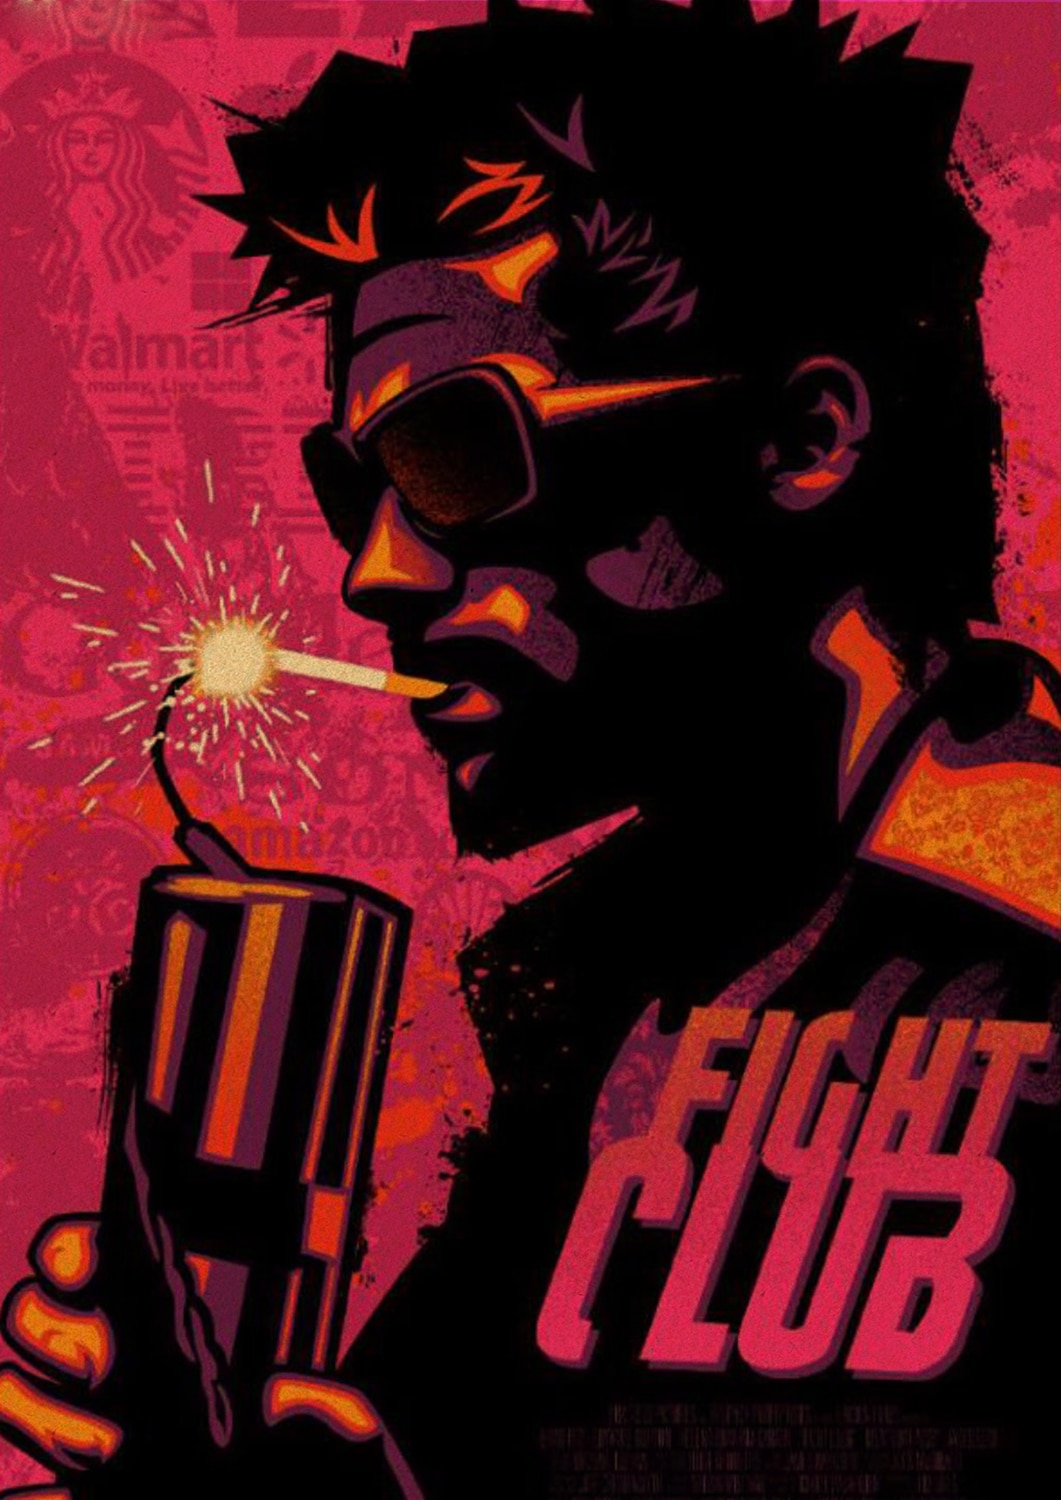 Buy three to send one Classic movie poster Fight Club Posters vintage Kraft poster Pinturas decorativa Cafe decoration poster. Painting & Calligraphy